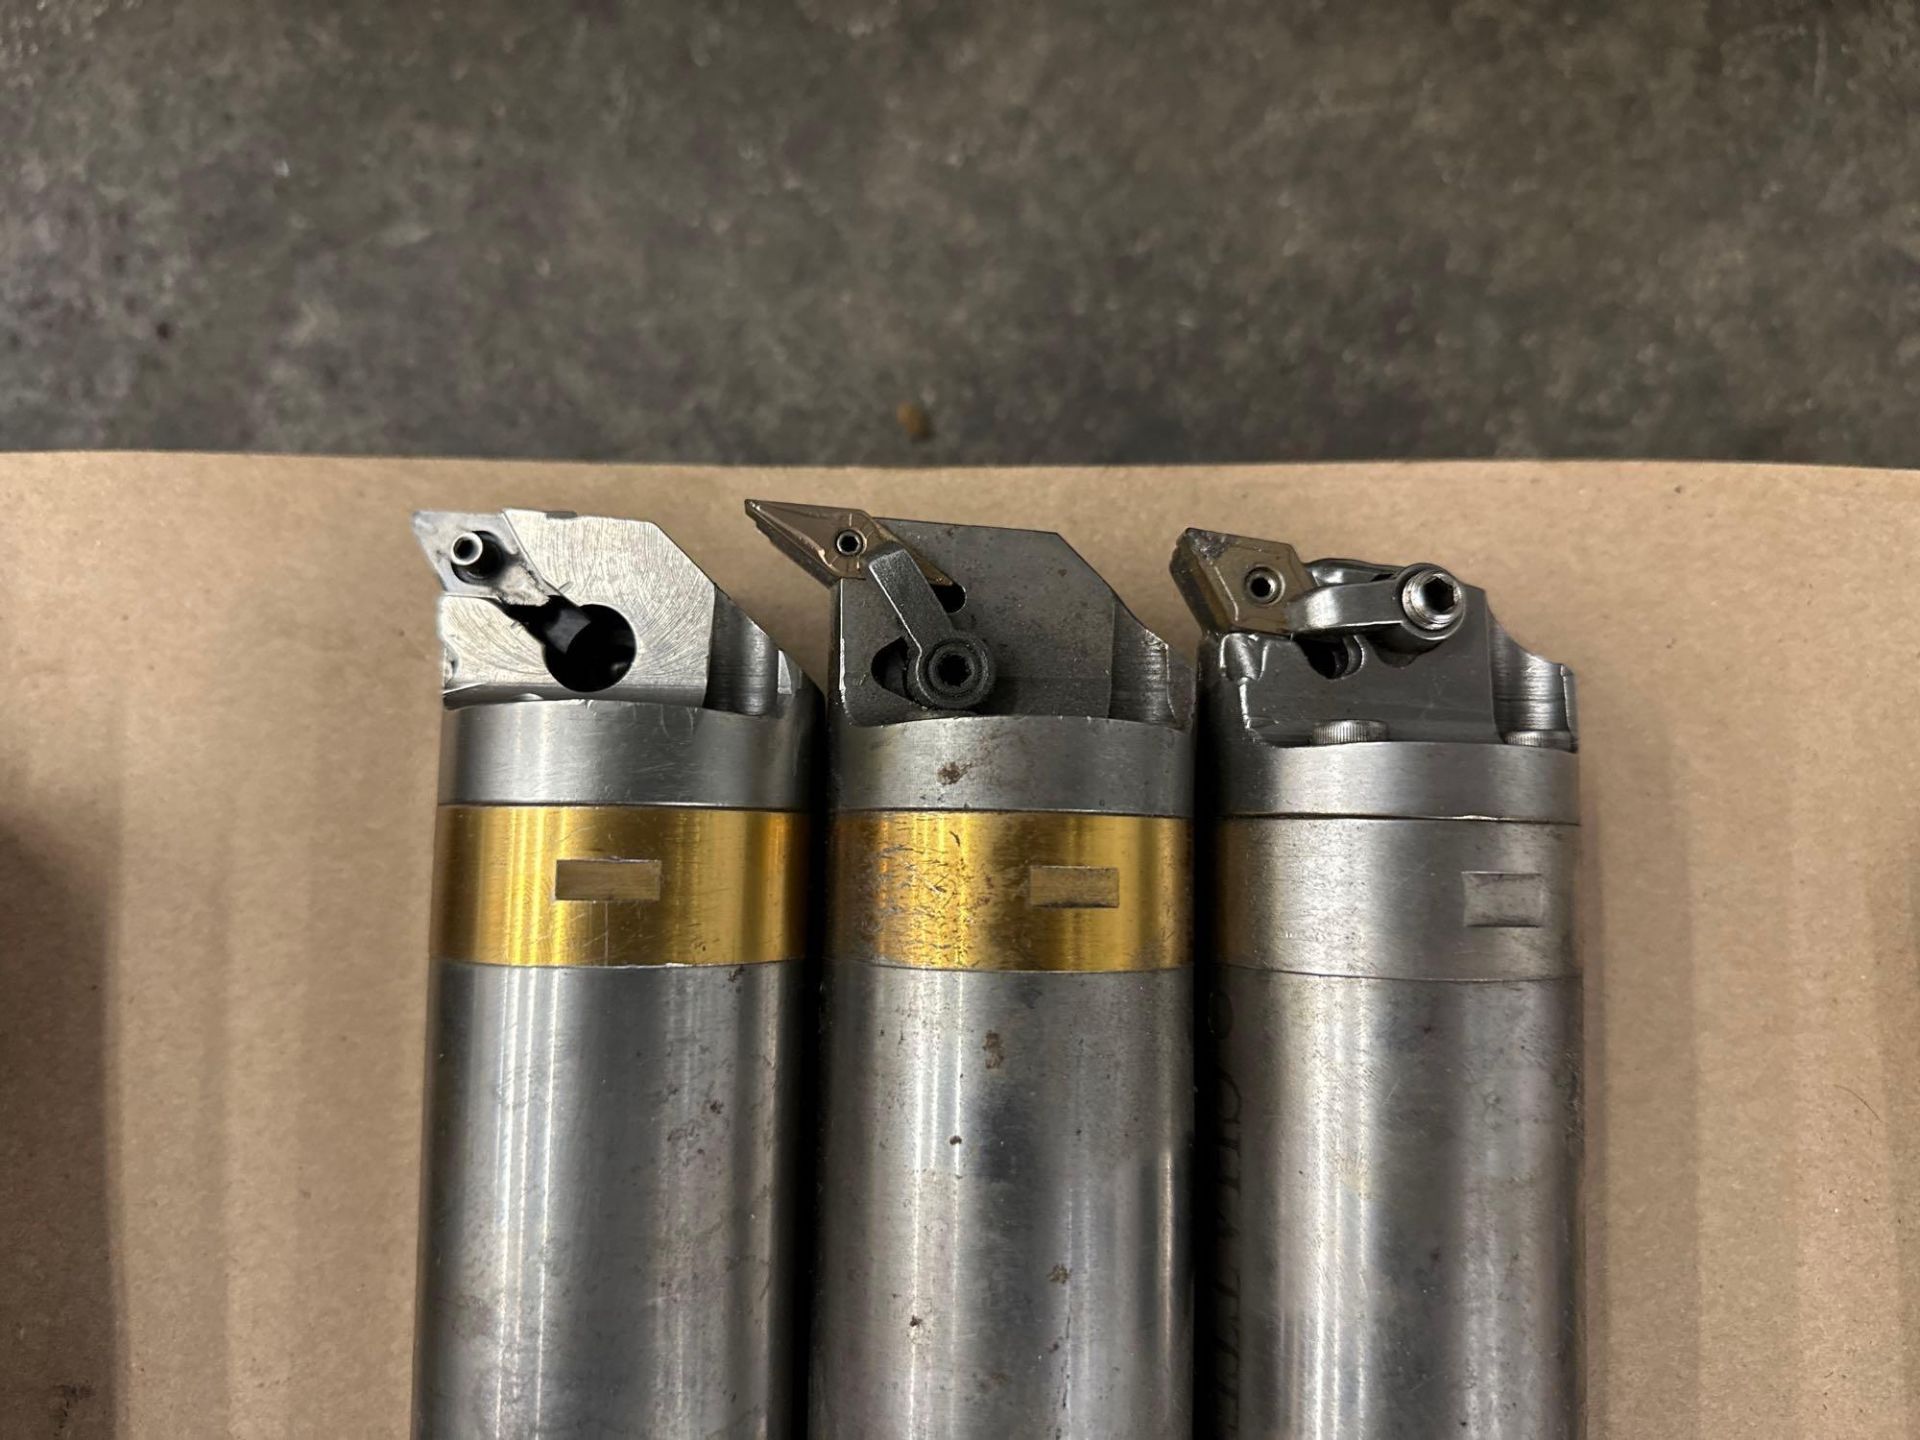 Lot of 3 Ultra Dex Boring Bars with Heads on: (2) CFT B2000 20, 1 7/8” X 19 1/2” (1) CFT B2000 18, 1 - Image 2 of 5